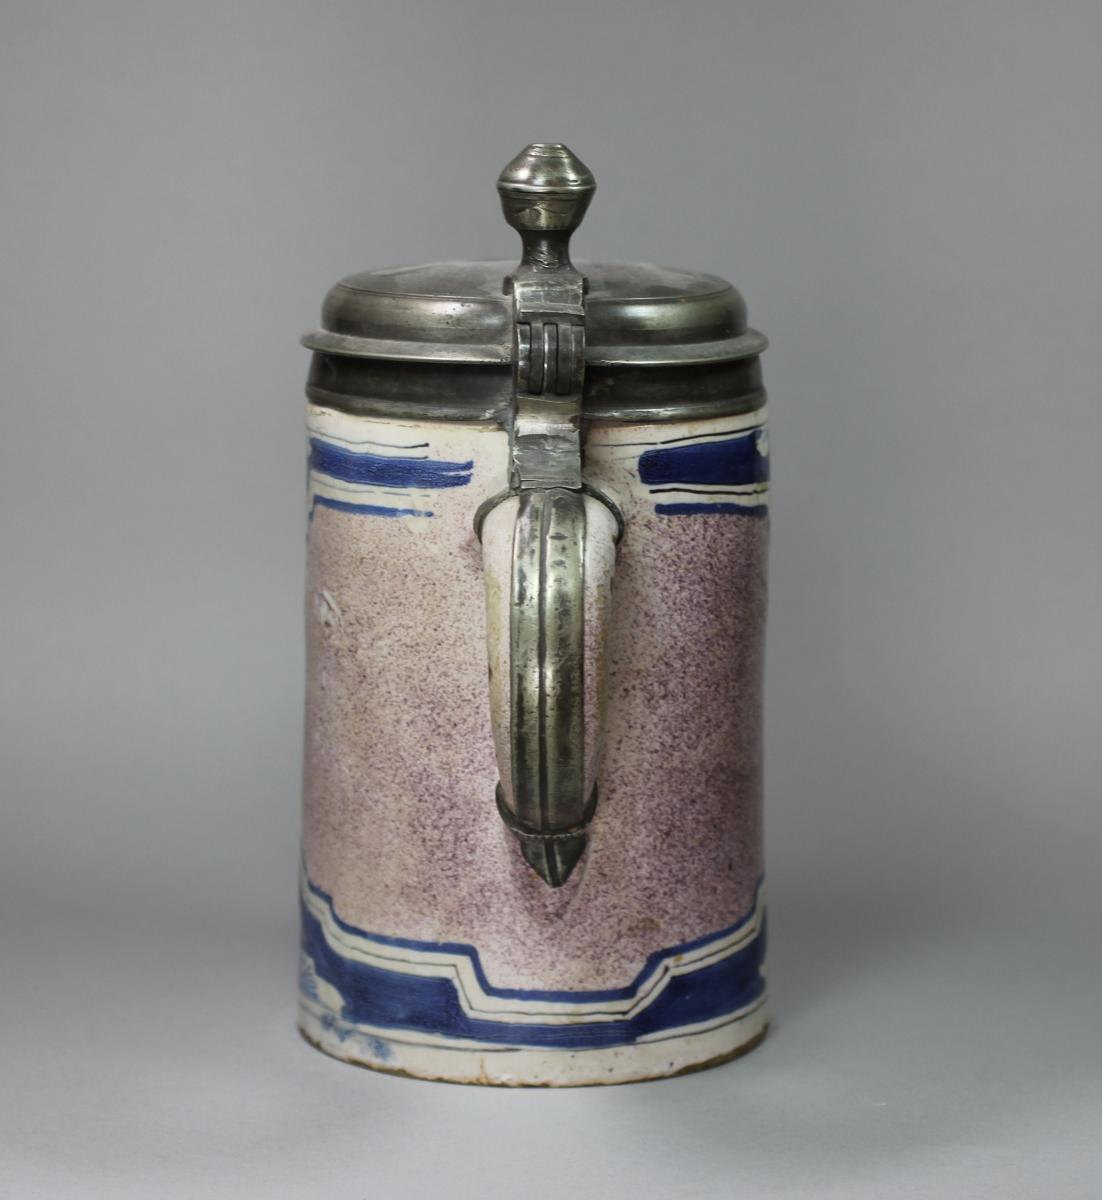 German faience tankard with pewter cover, 18th century